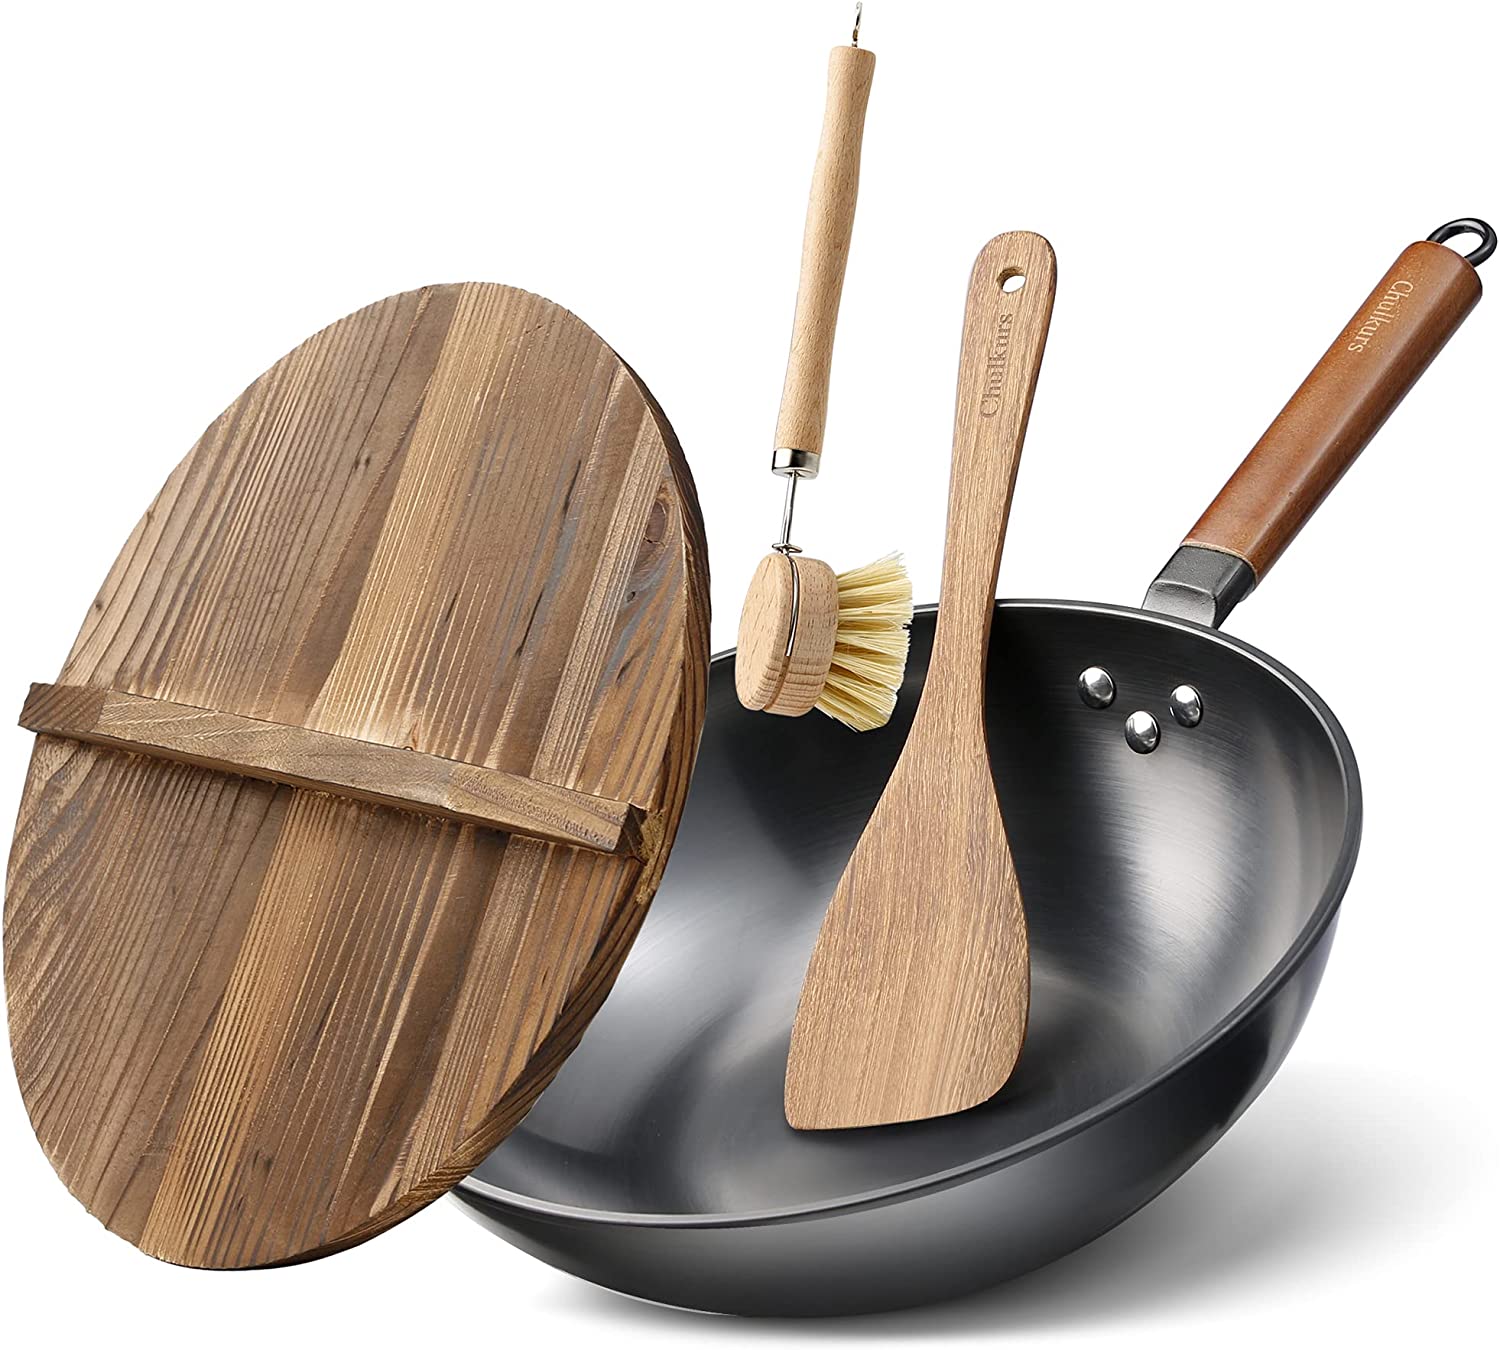 The 10 best woks to buy for home stir-frying